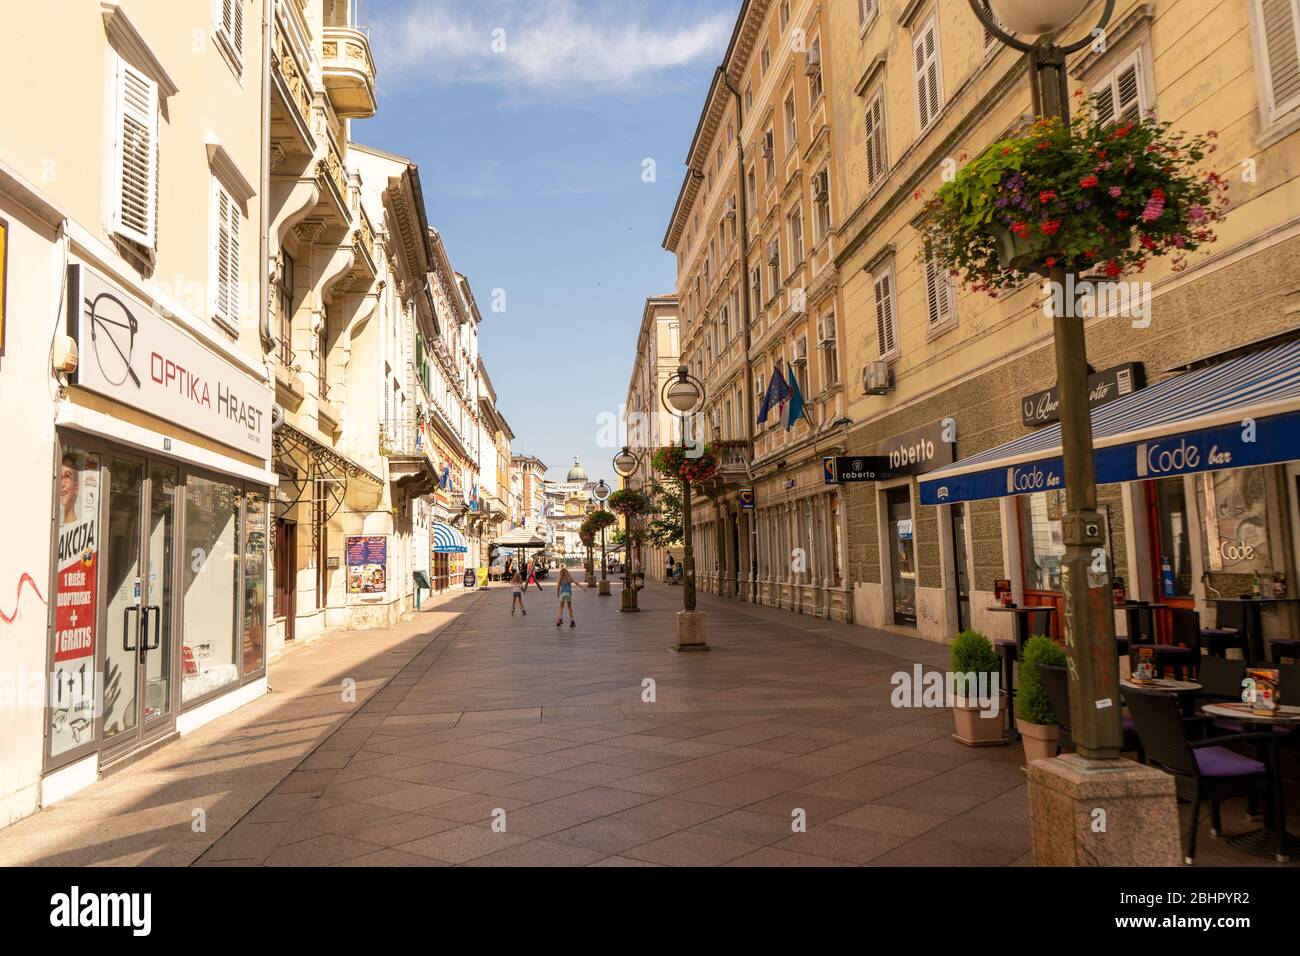 Korzo promenade is one of the most famous streets of Rijeka, Croatia. This street is located in city center. June 2019 Stock Photo